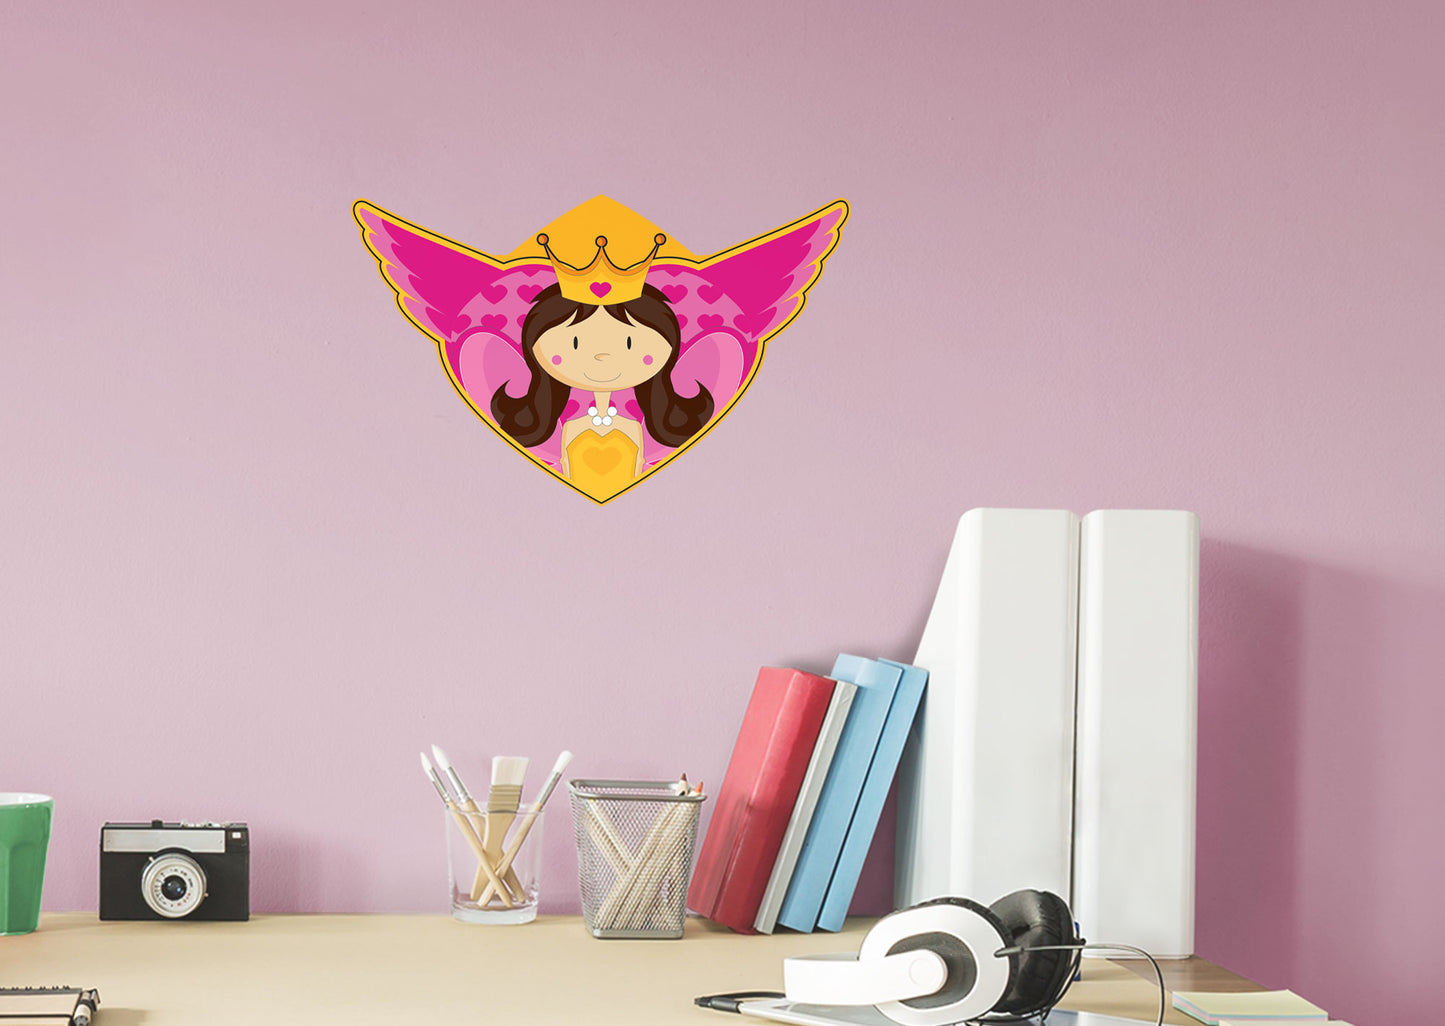 Nursery: Nursery Pink Wings Icon        -   Removable     Adhesive Decal